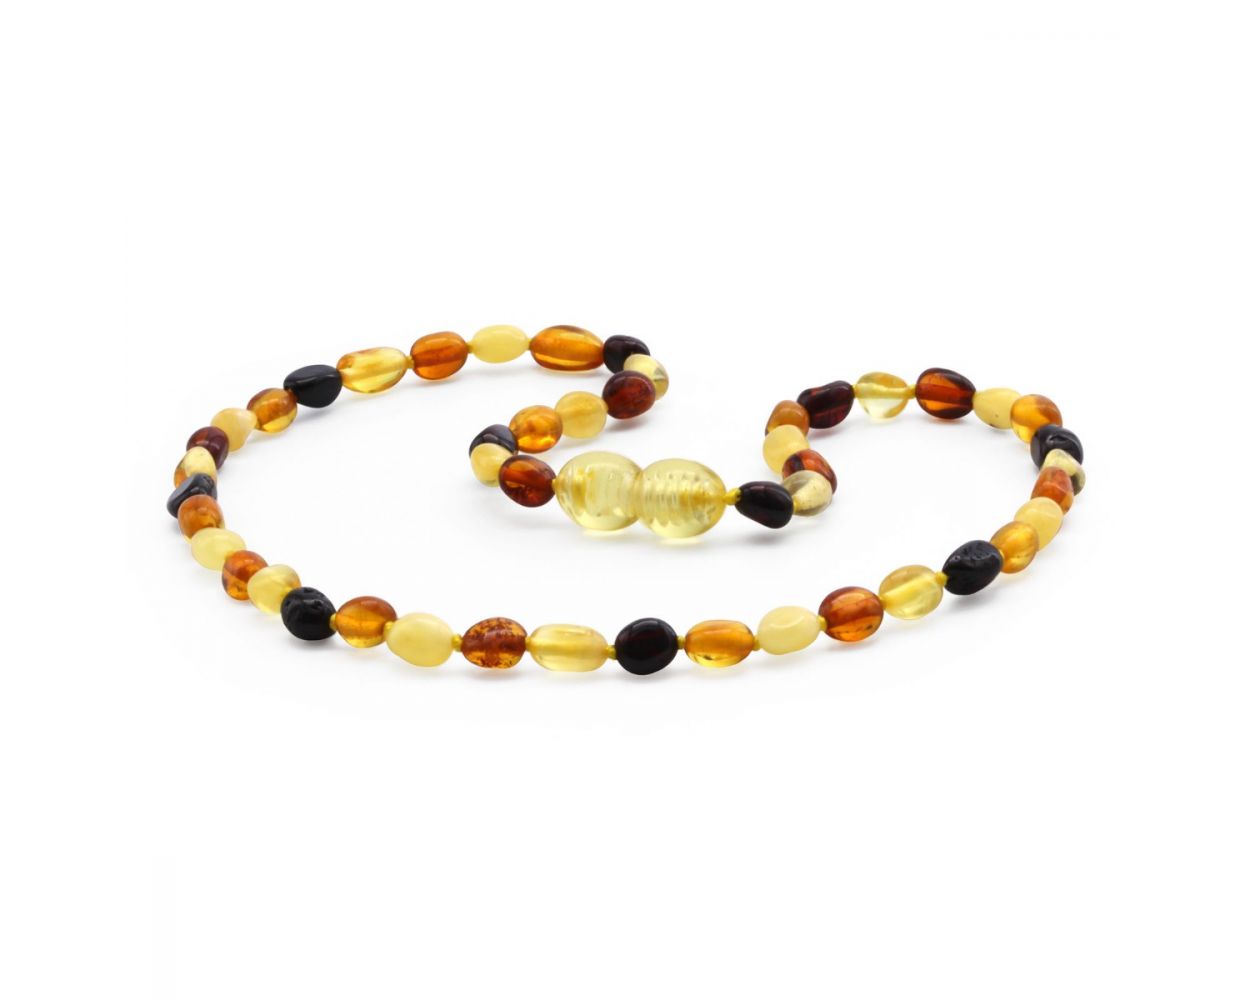 Can Baltic Amber Help Your Baby With Teething Pain?